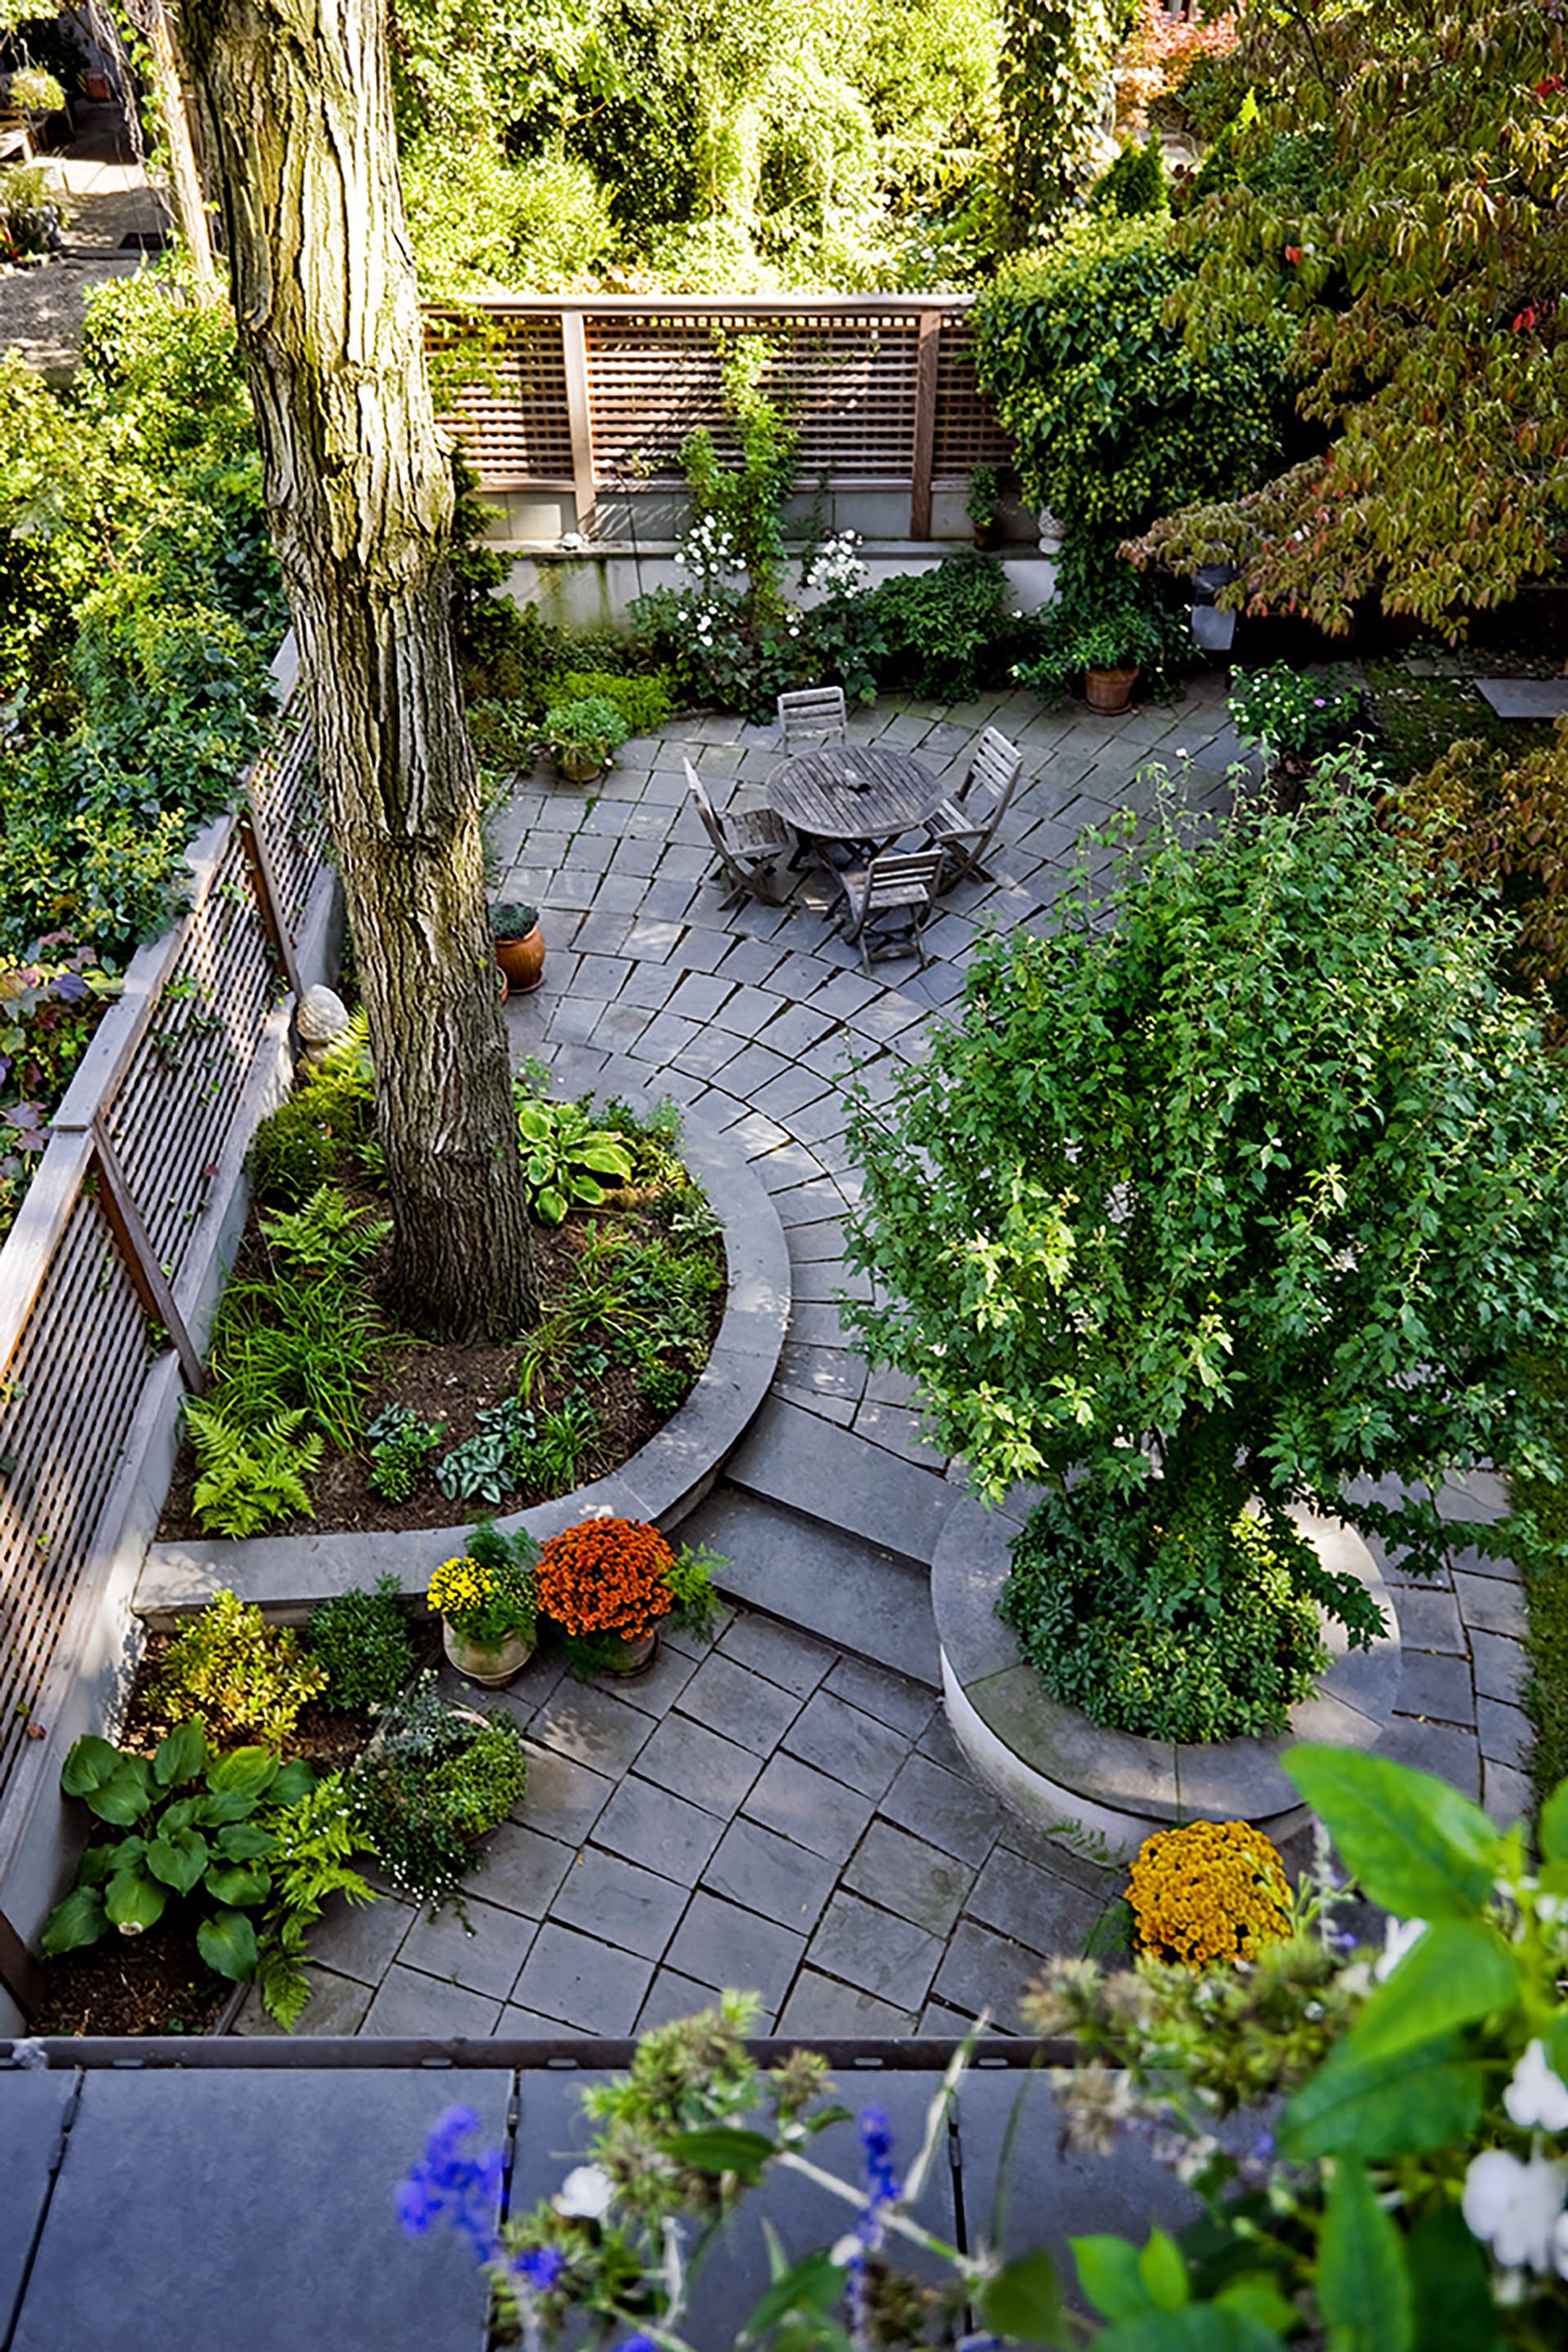 Rear yard with one large tree, lots of flowers and landscaping, and winding stone pavers throughout.